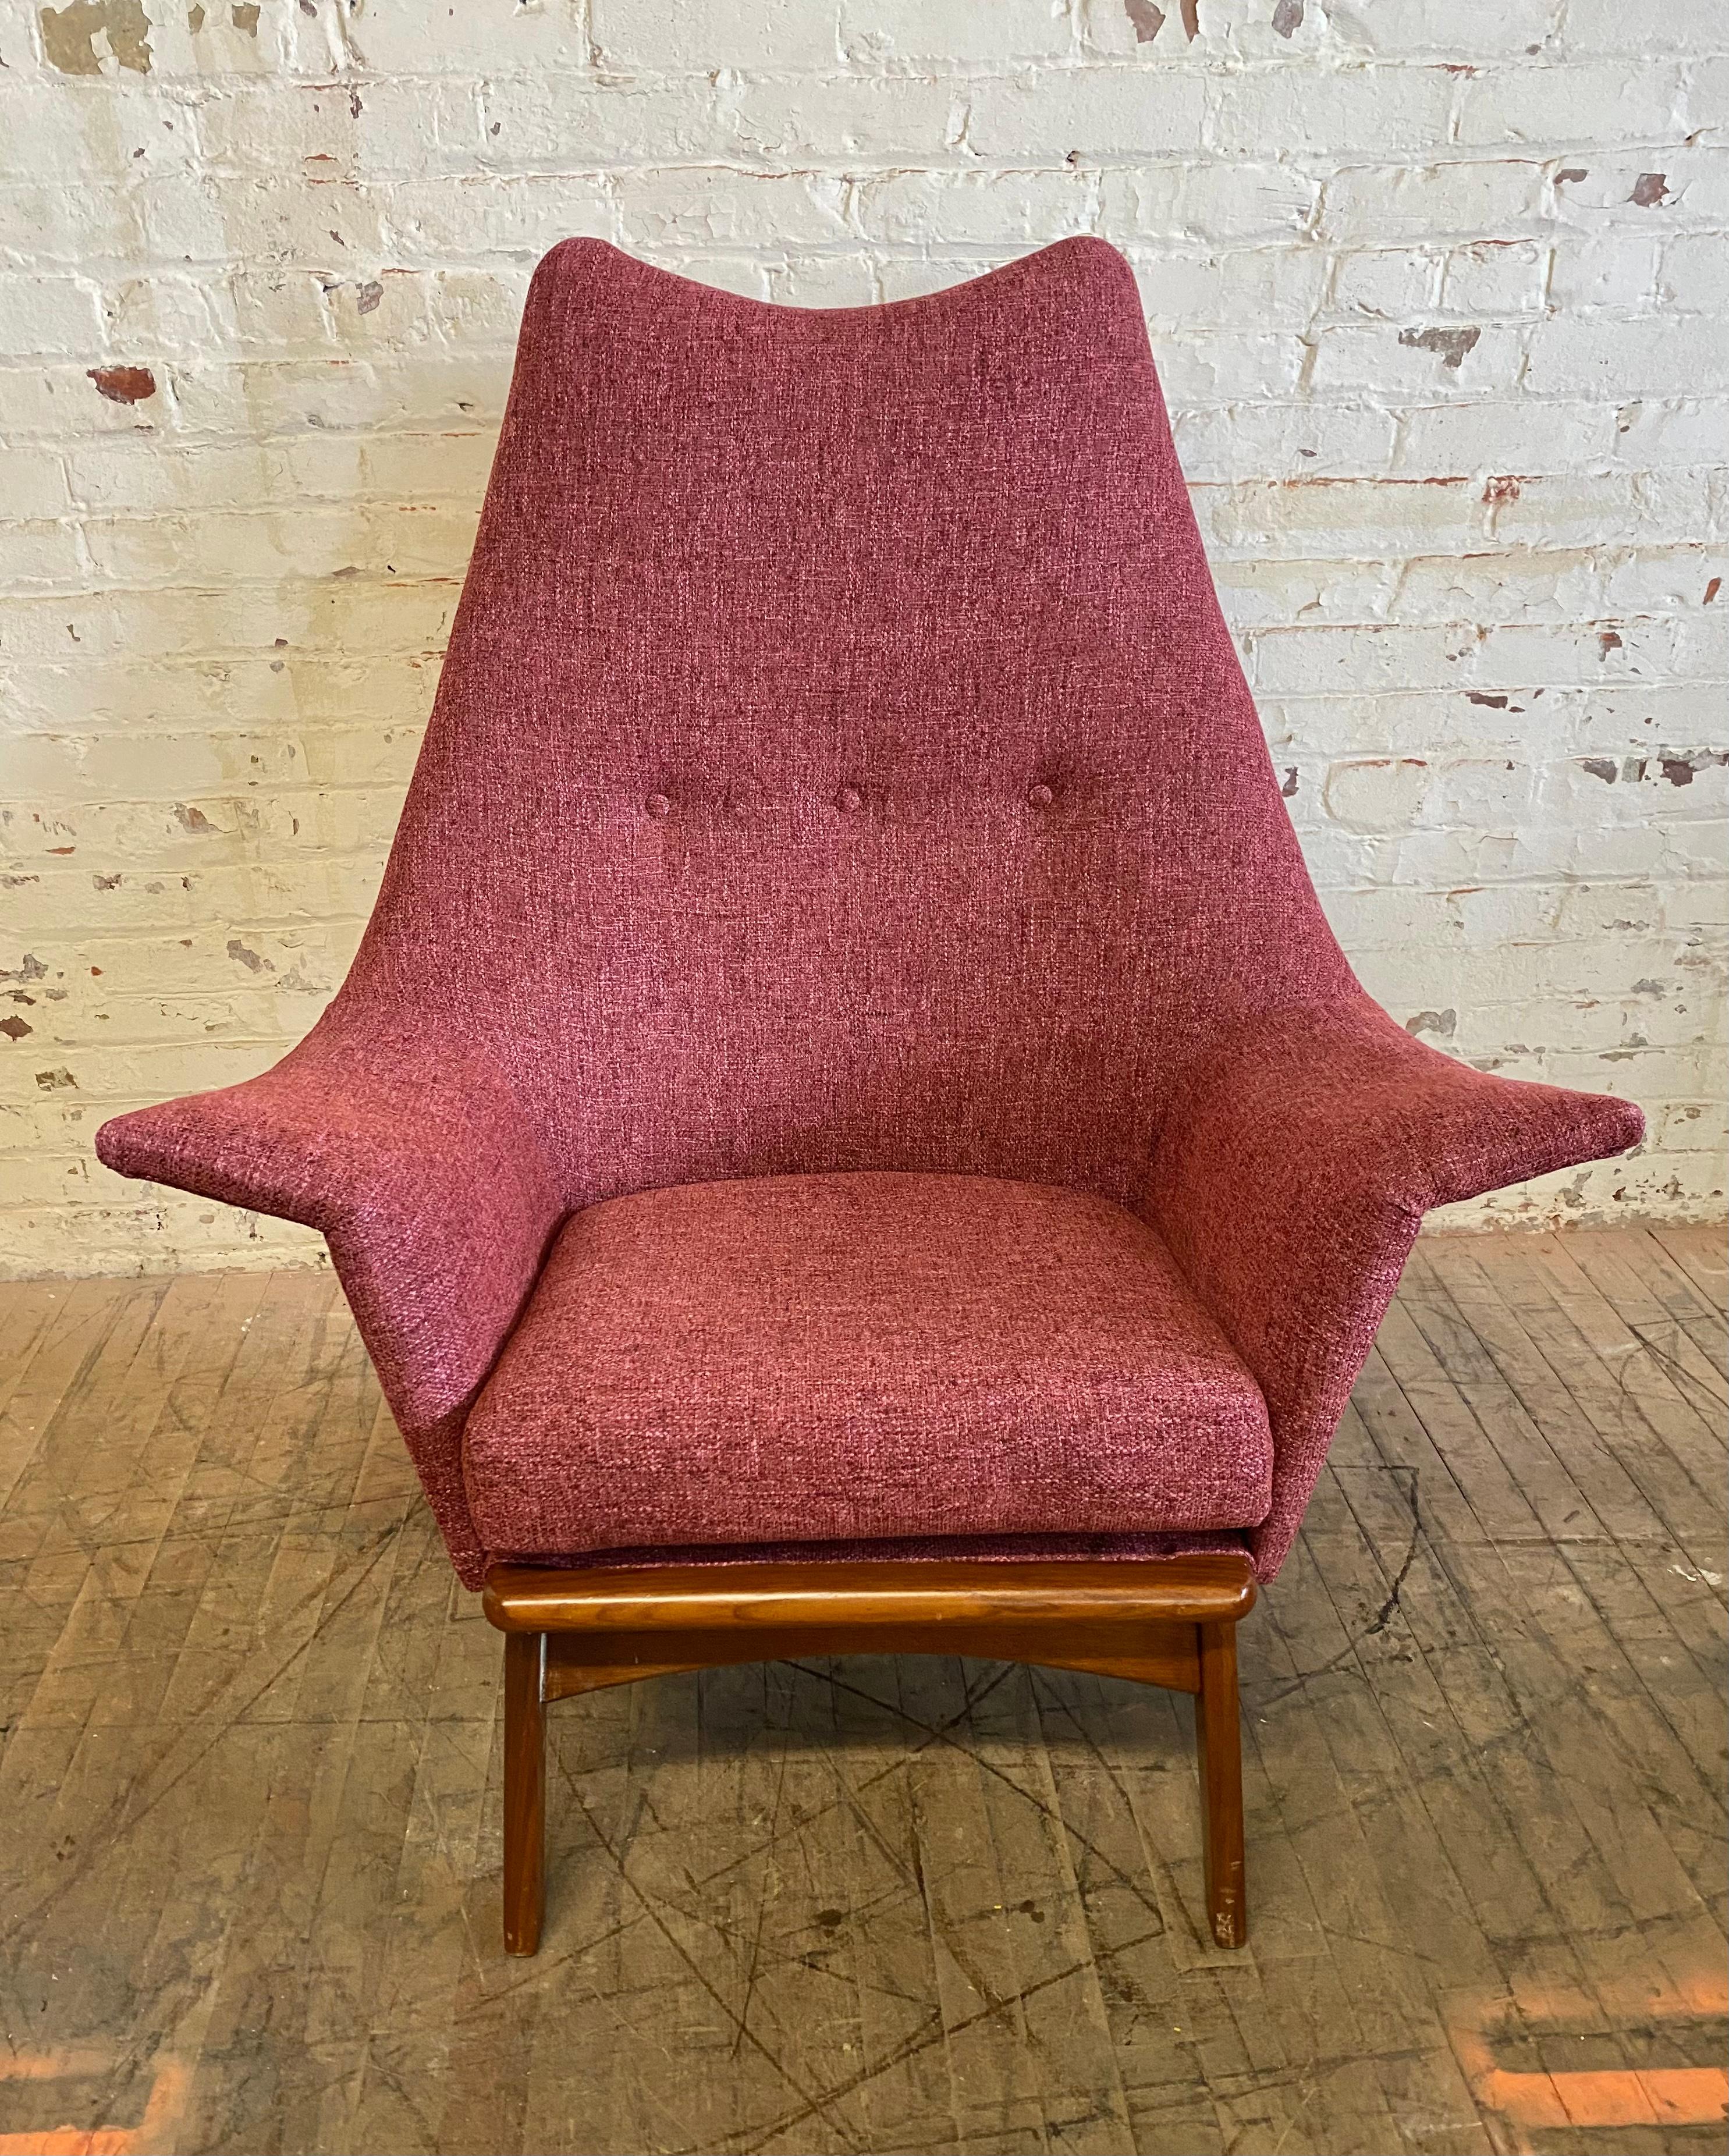 Classic modernist sculptural lounge chair, designed by Adrian Pearsall for Craft Associates, amazing design, Jetsons wing chair. Extremely comfortable, newly upholstered. Hand delivery avail to New York City or anywhere en route from Buffalo NY.